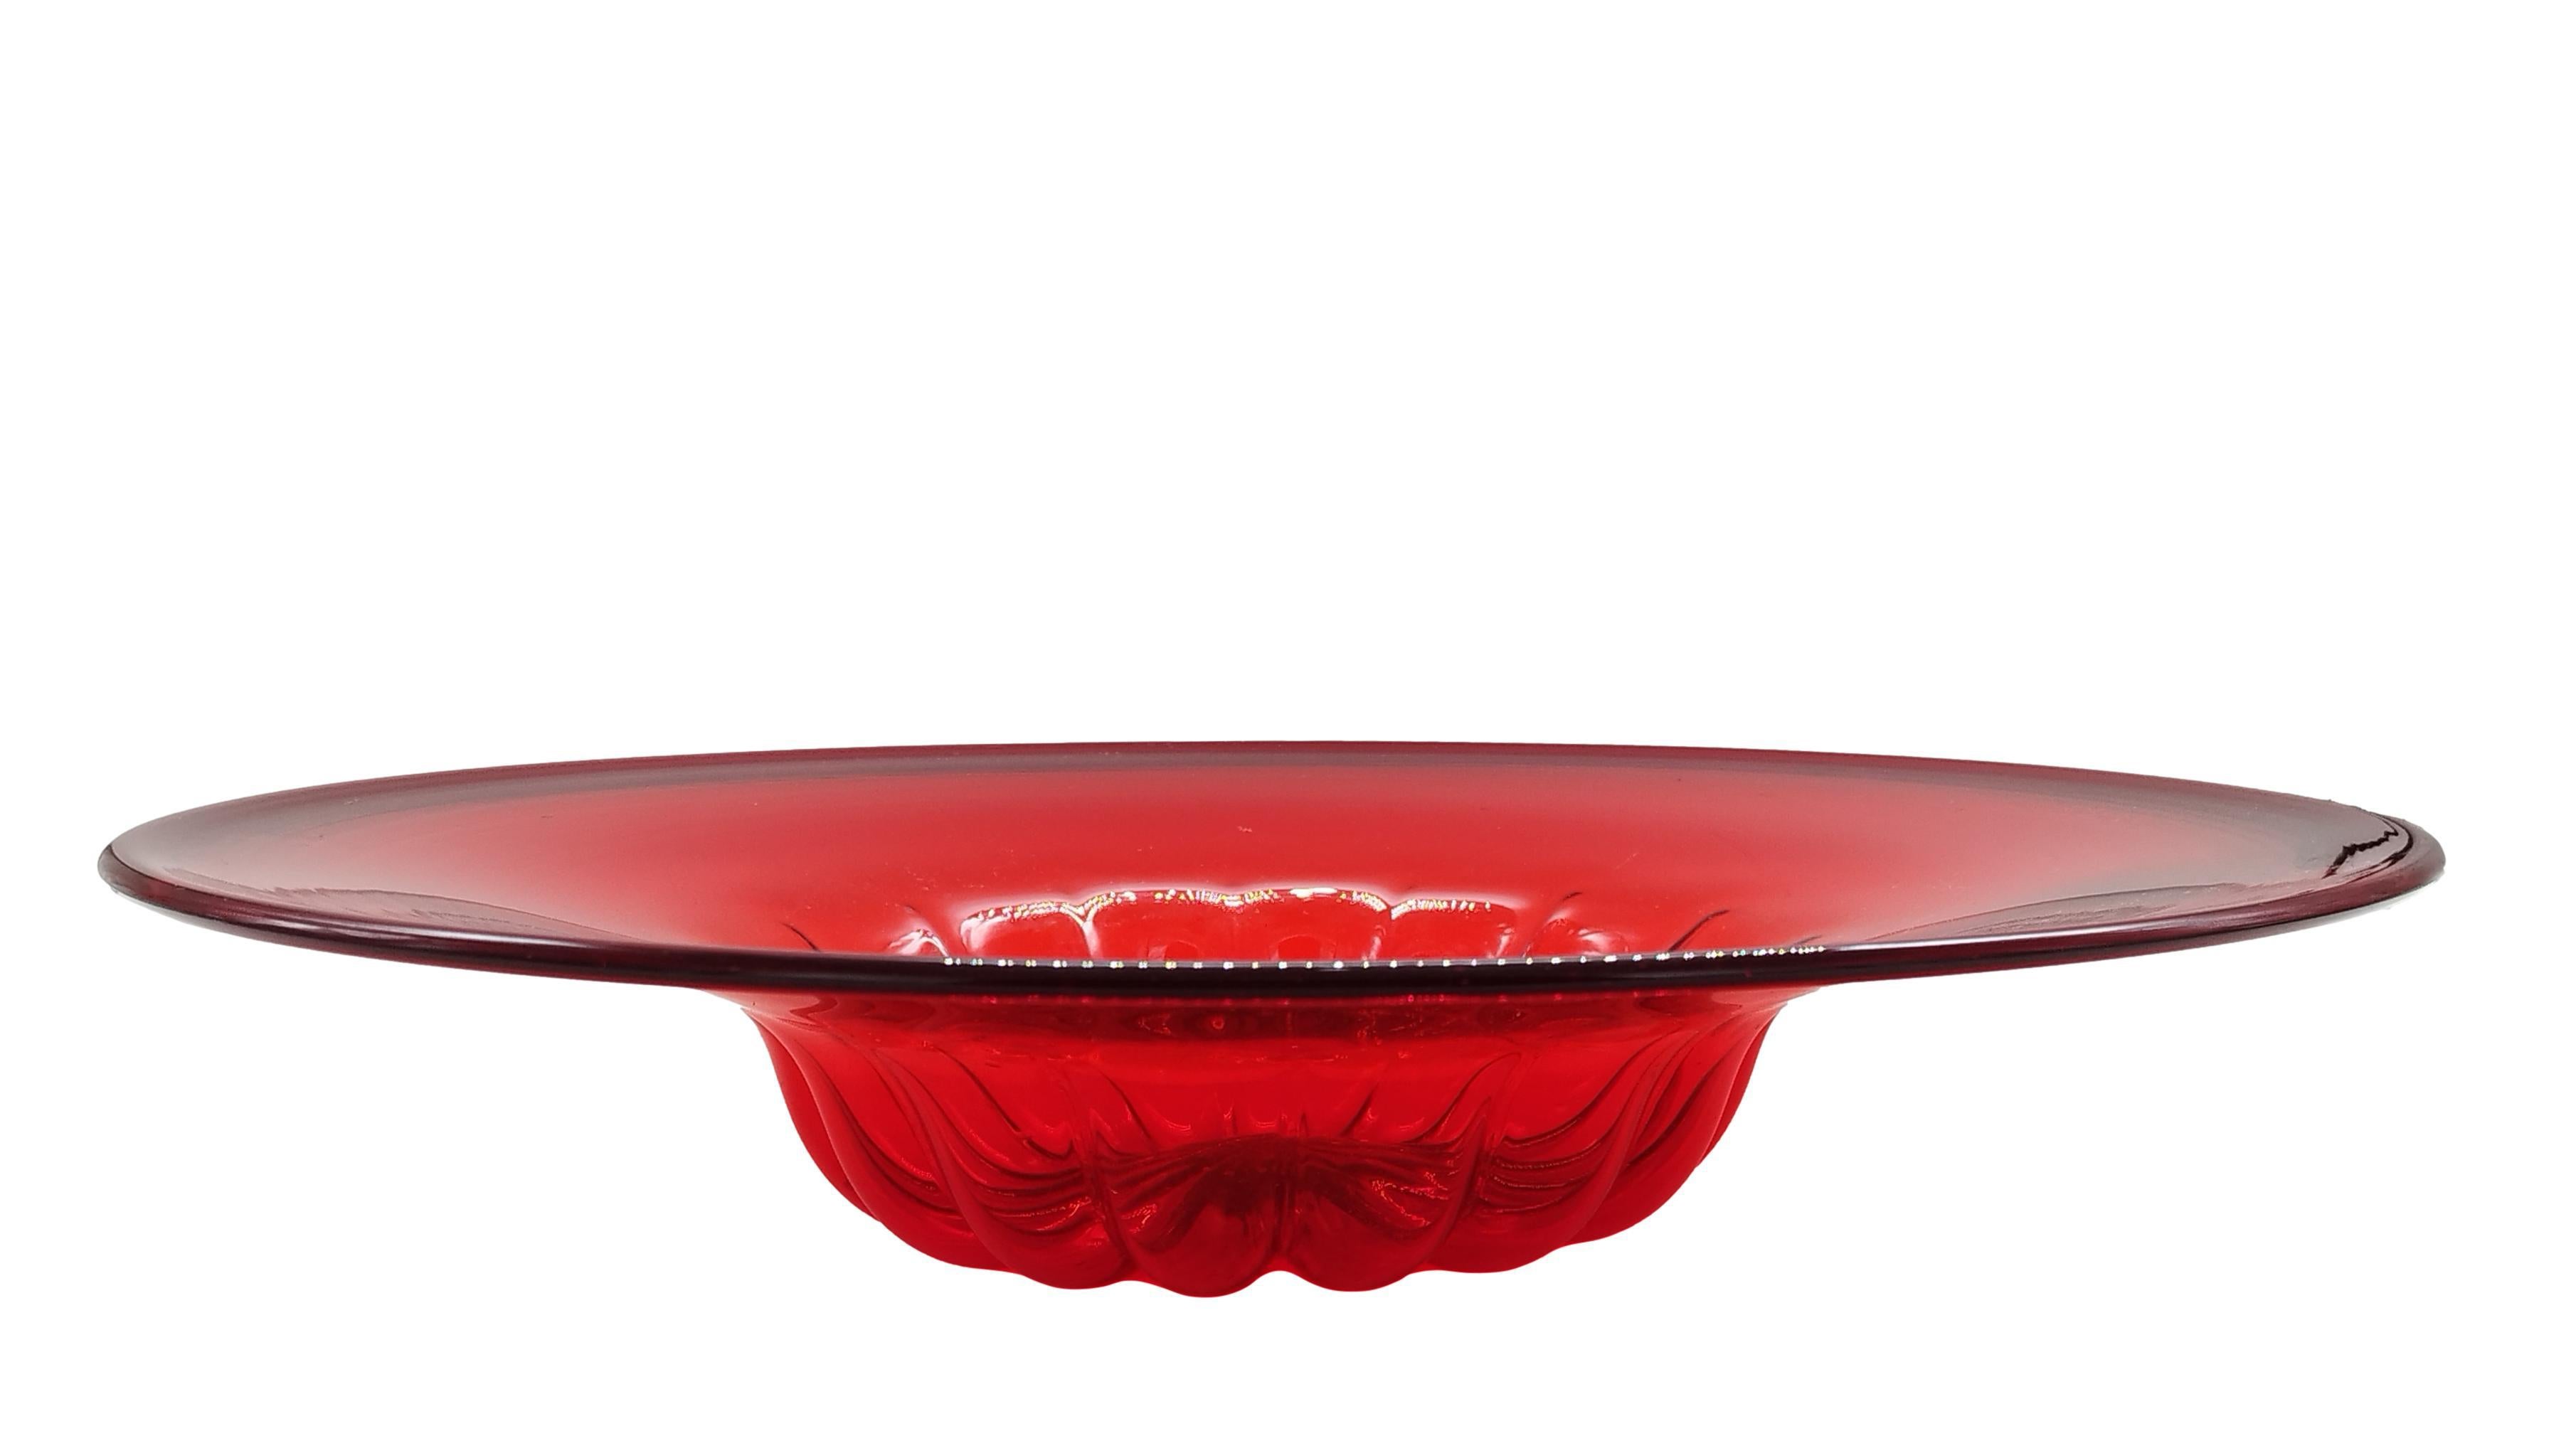 An exceptional large dish in ruby red blown glass, set inside a wrought iron frame, forged in the shape of flowers and leaves. The body of the dish internally is ribbed, the brim with an enchanting vibrant pattern characteristic of Master Zecchin's